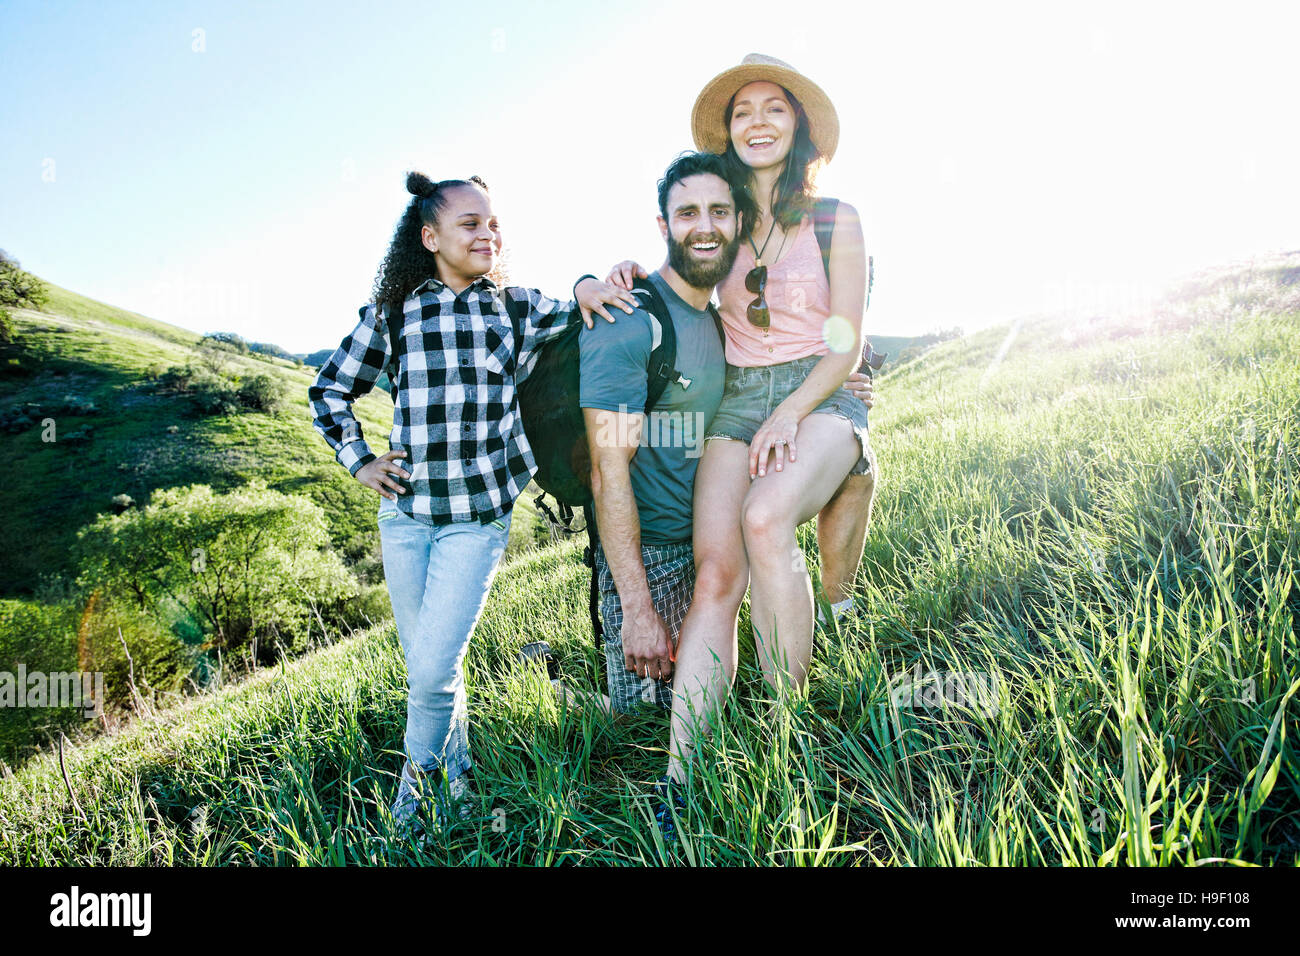 Portrait of smiling family posing on hill Stock Photo